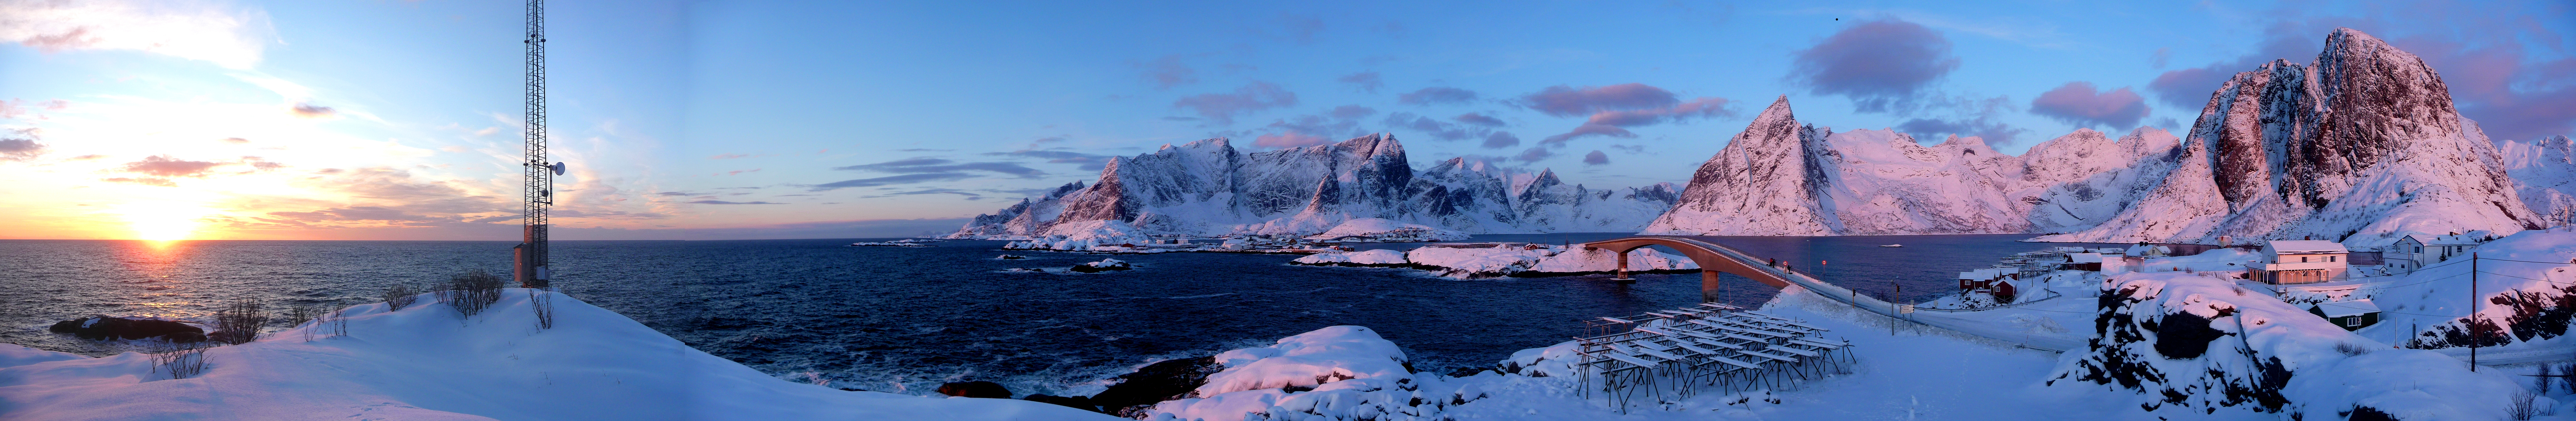 Reine, Norway by Timber, licensed under CC BY 2.0